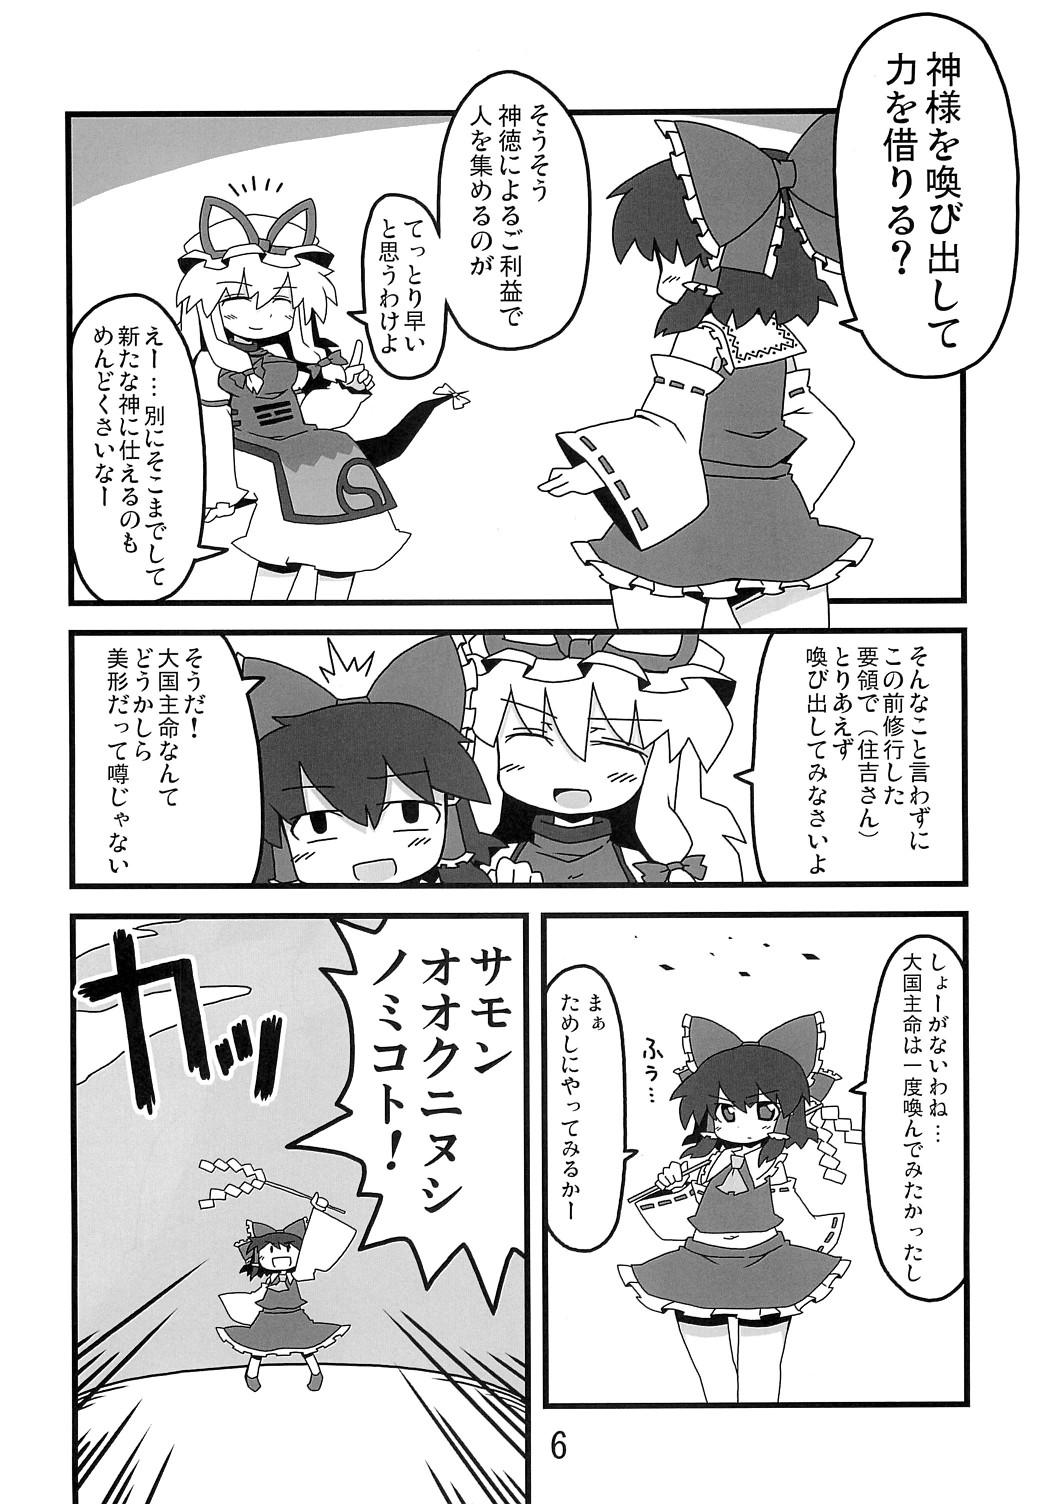 Affair 東方豊年祭 - Touhou project Titties - Page 5